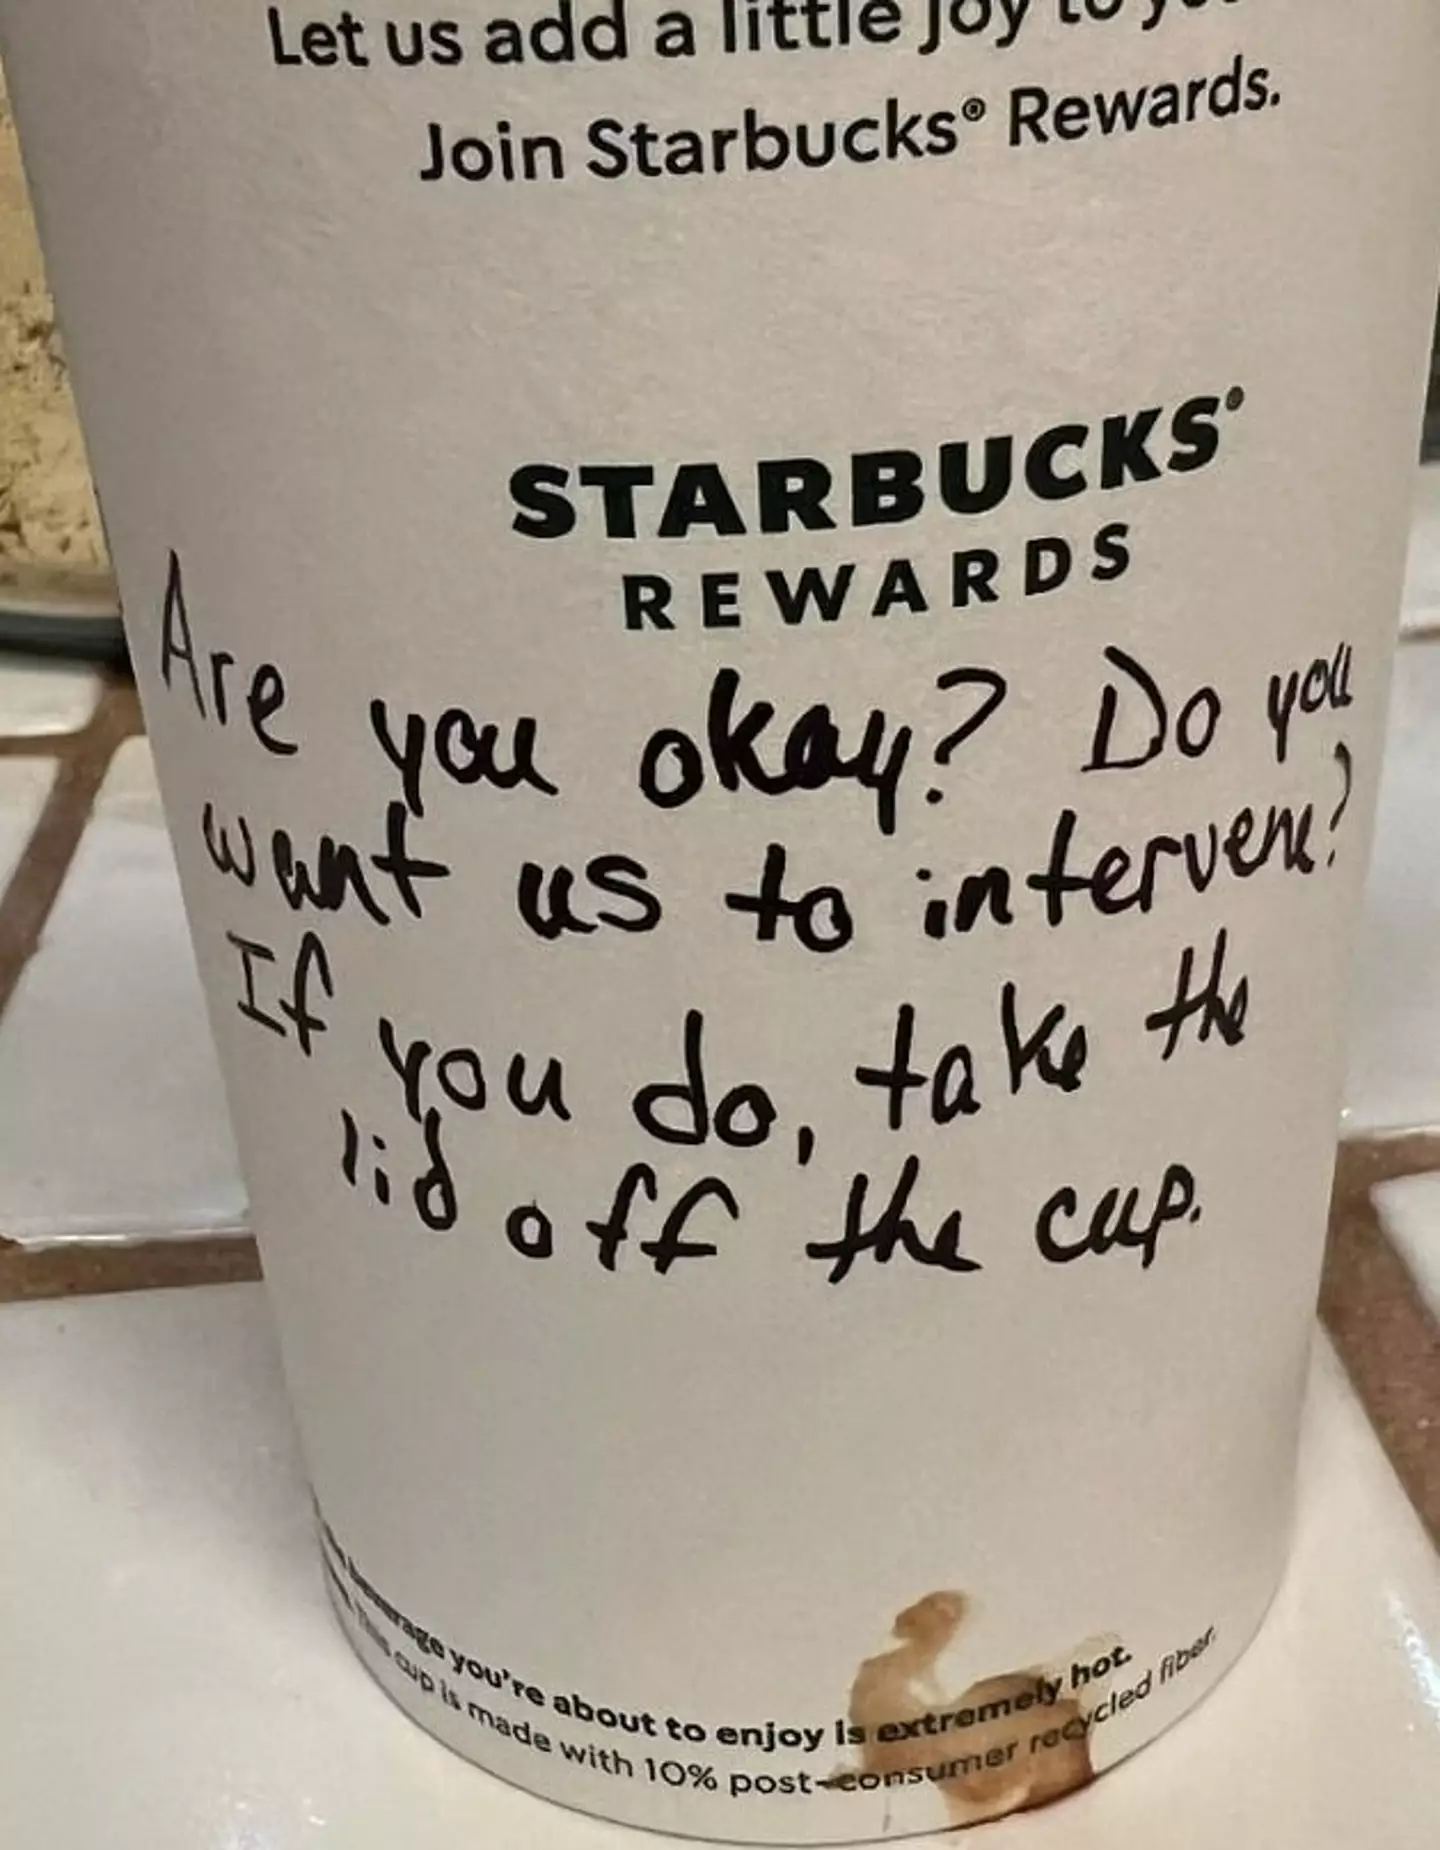 The message the Starbucks barista left on the cup.